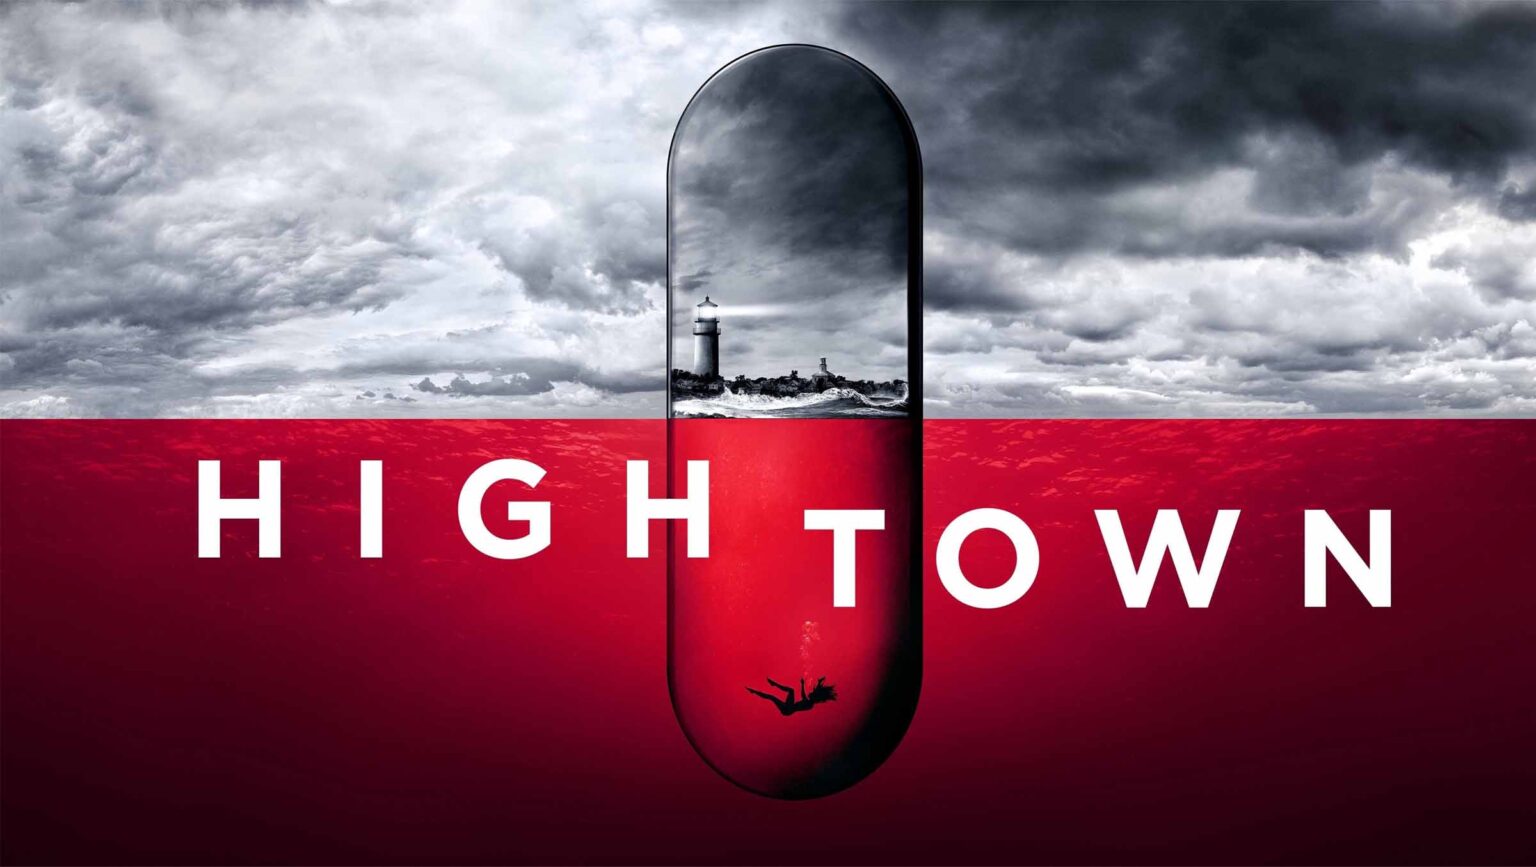 The latest drama from Starz, 'Hightown' shows off the popular Cape Cod destination Providencetown, or P-town, but with a UV light to see the dark spots.